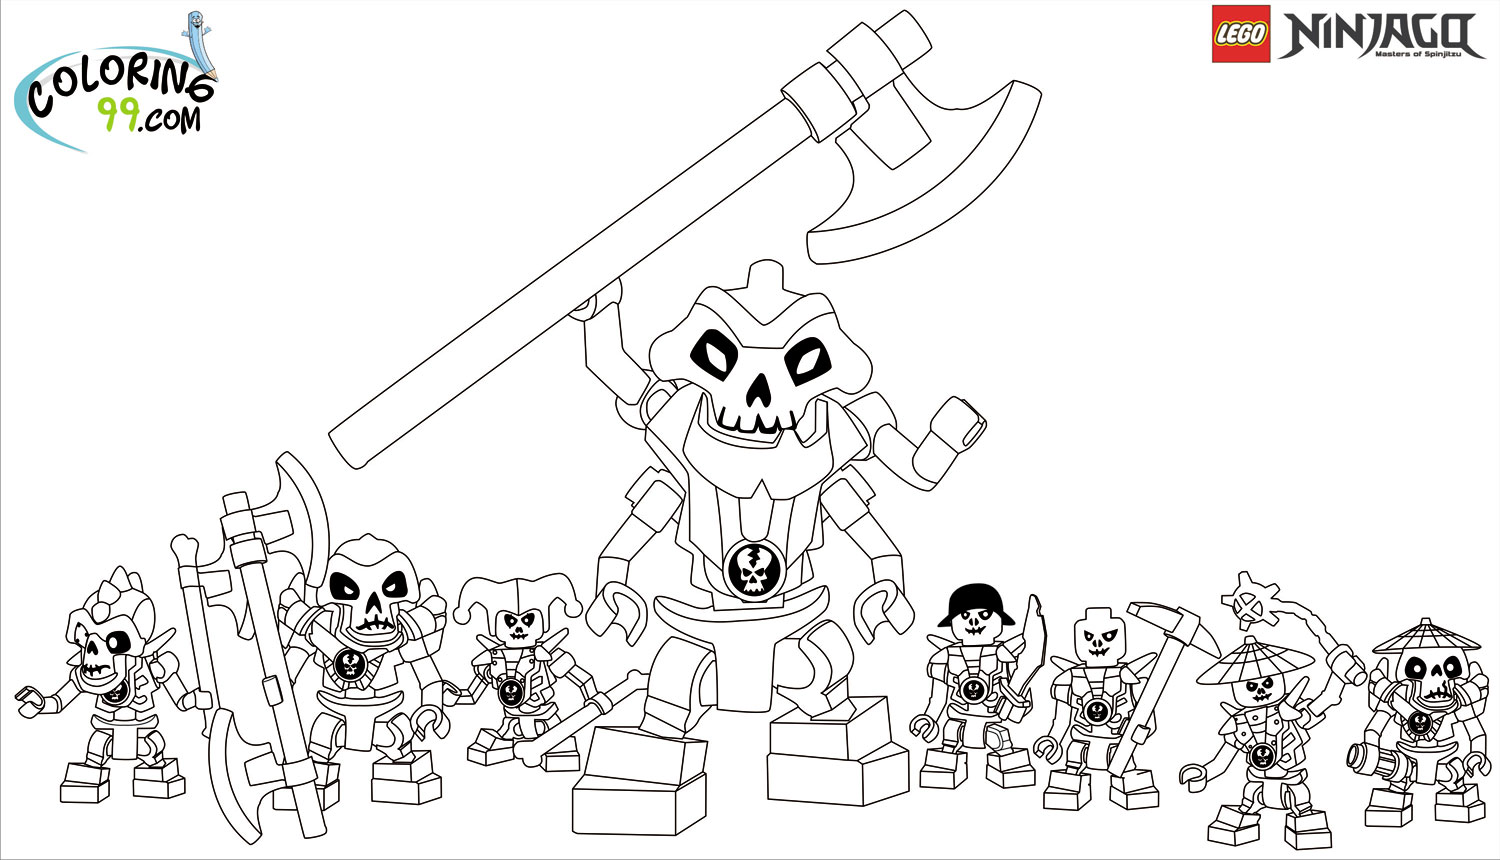 Download LEGO Ninjago Coloring Pages | Minister Coloring